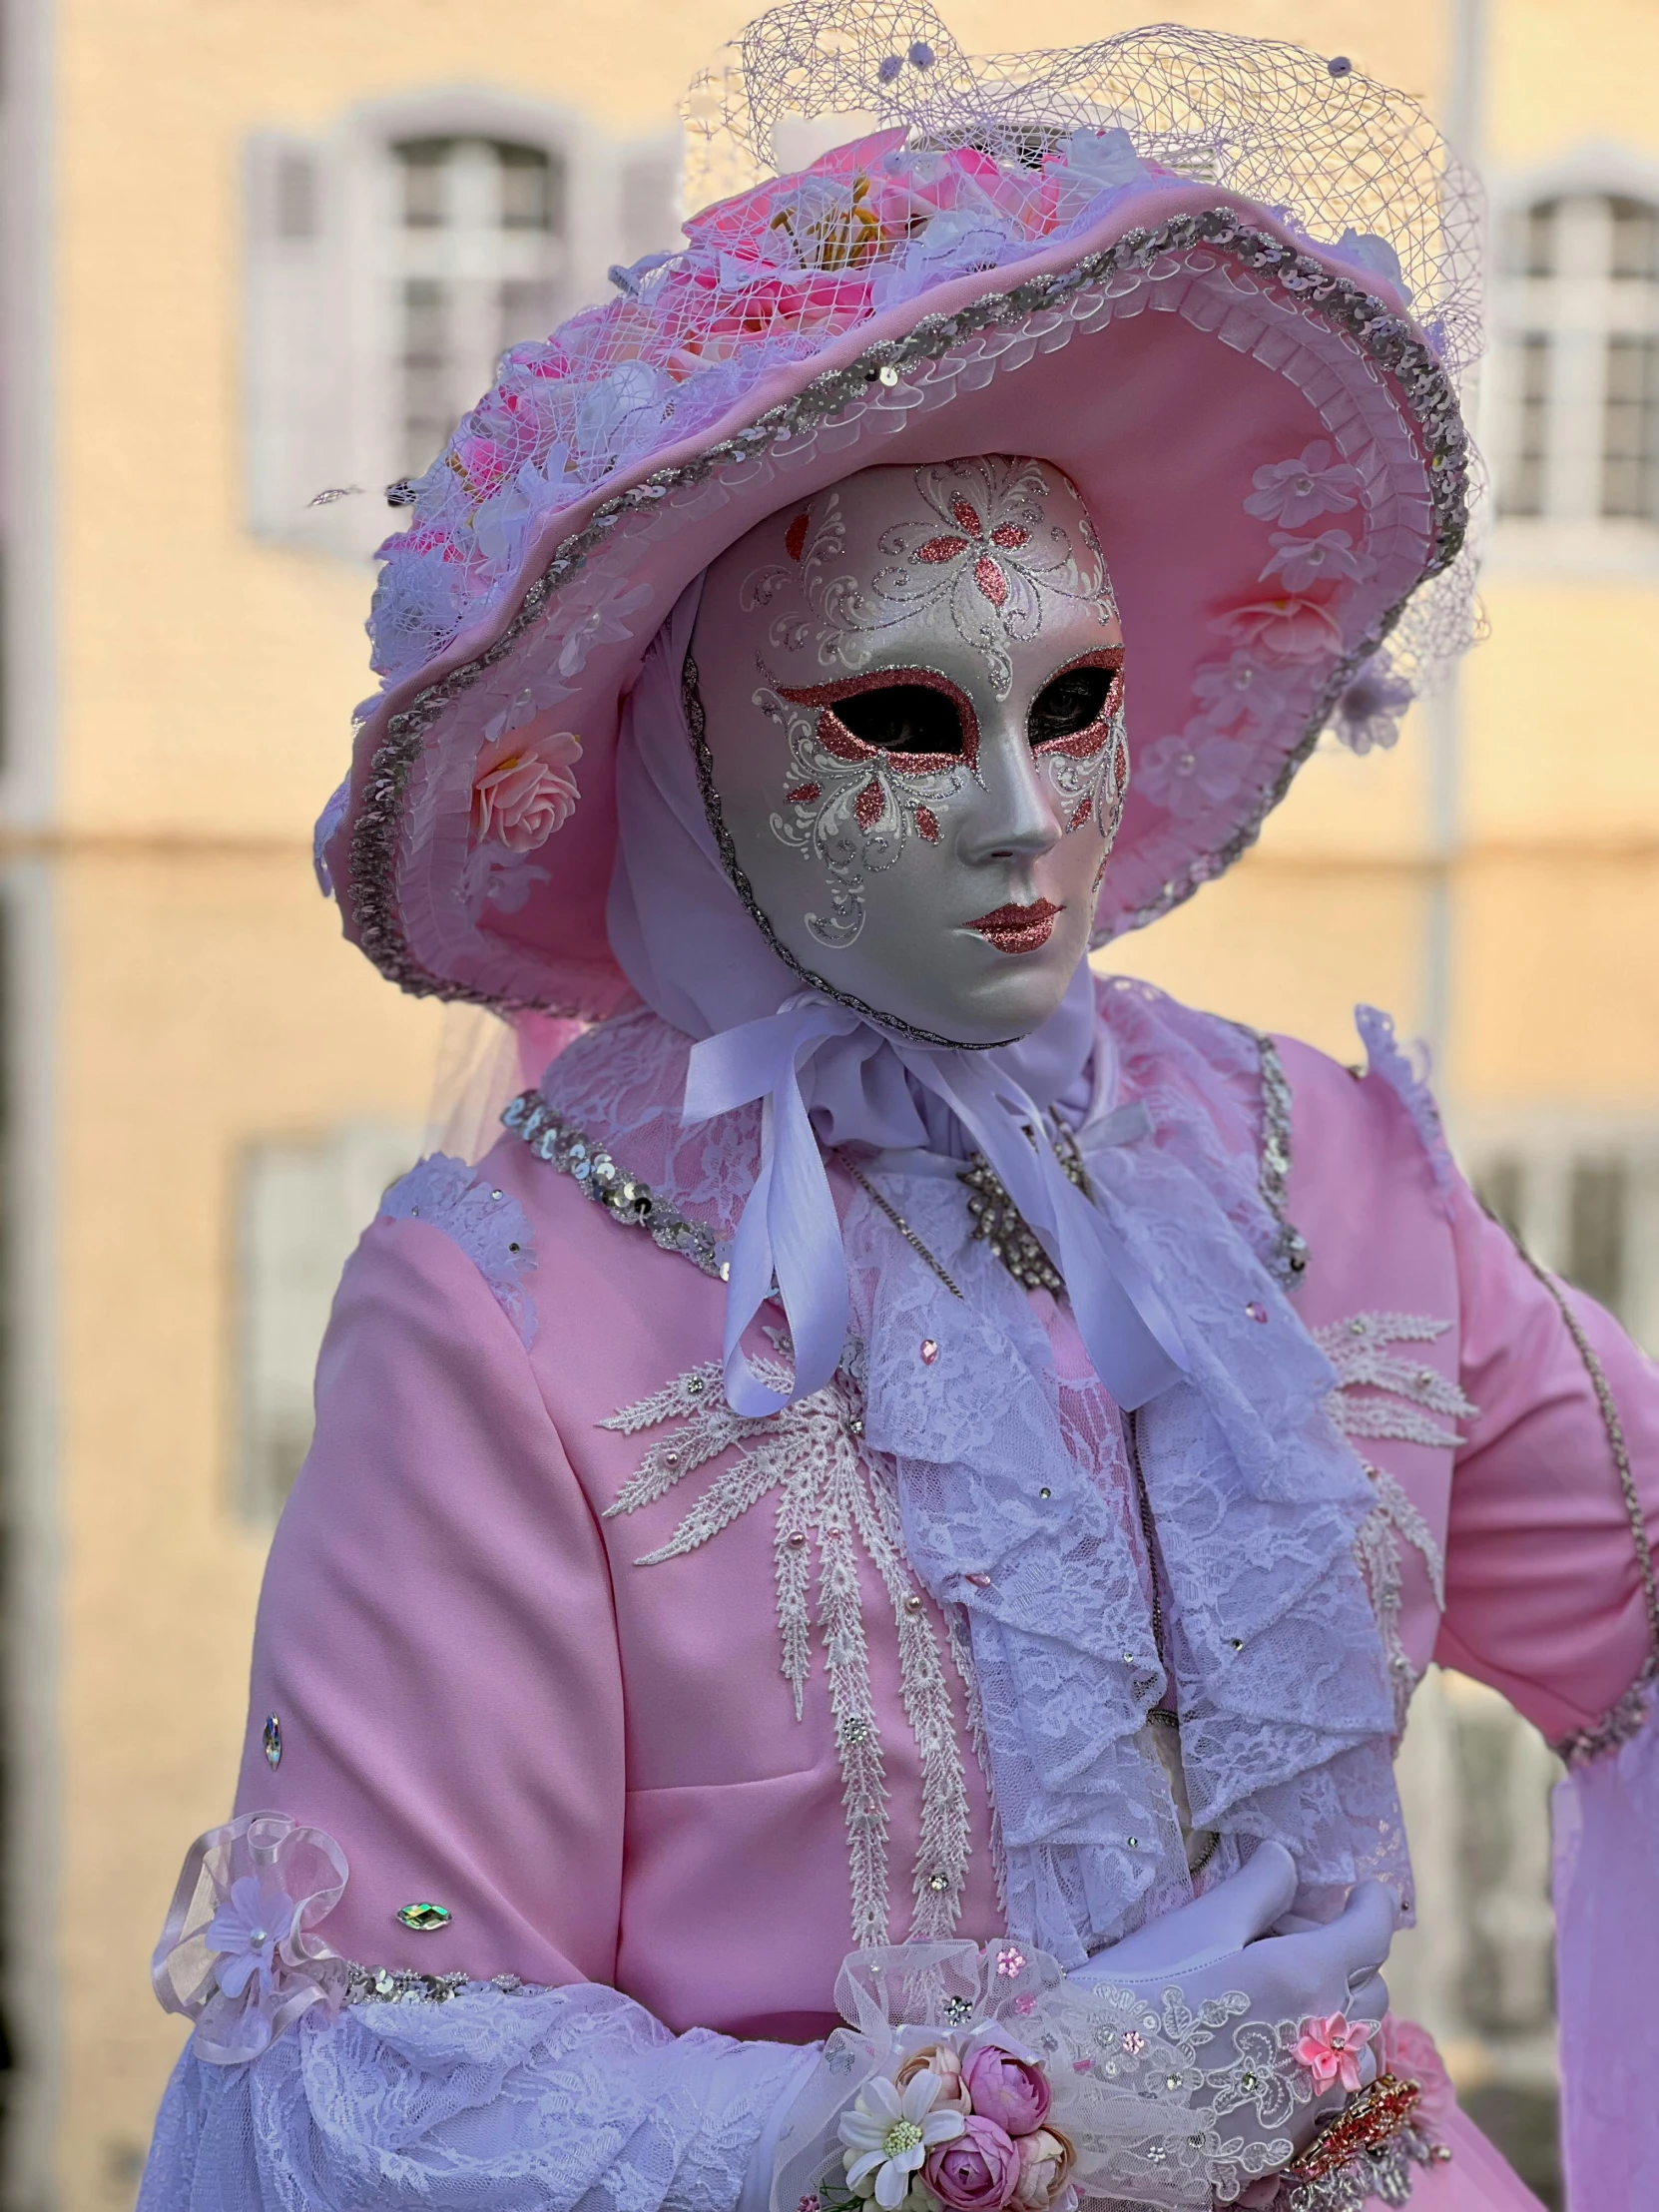 a person with a big hat on and colorful makeup